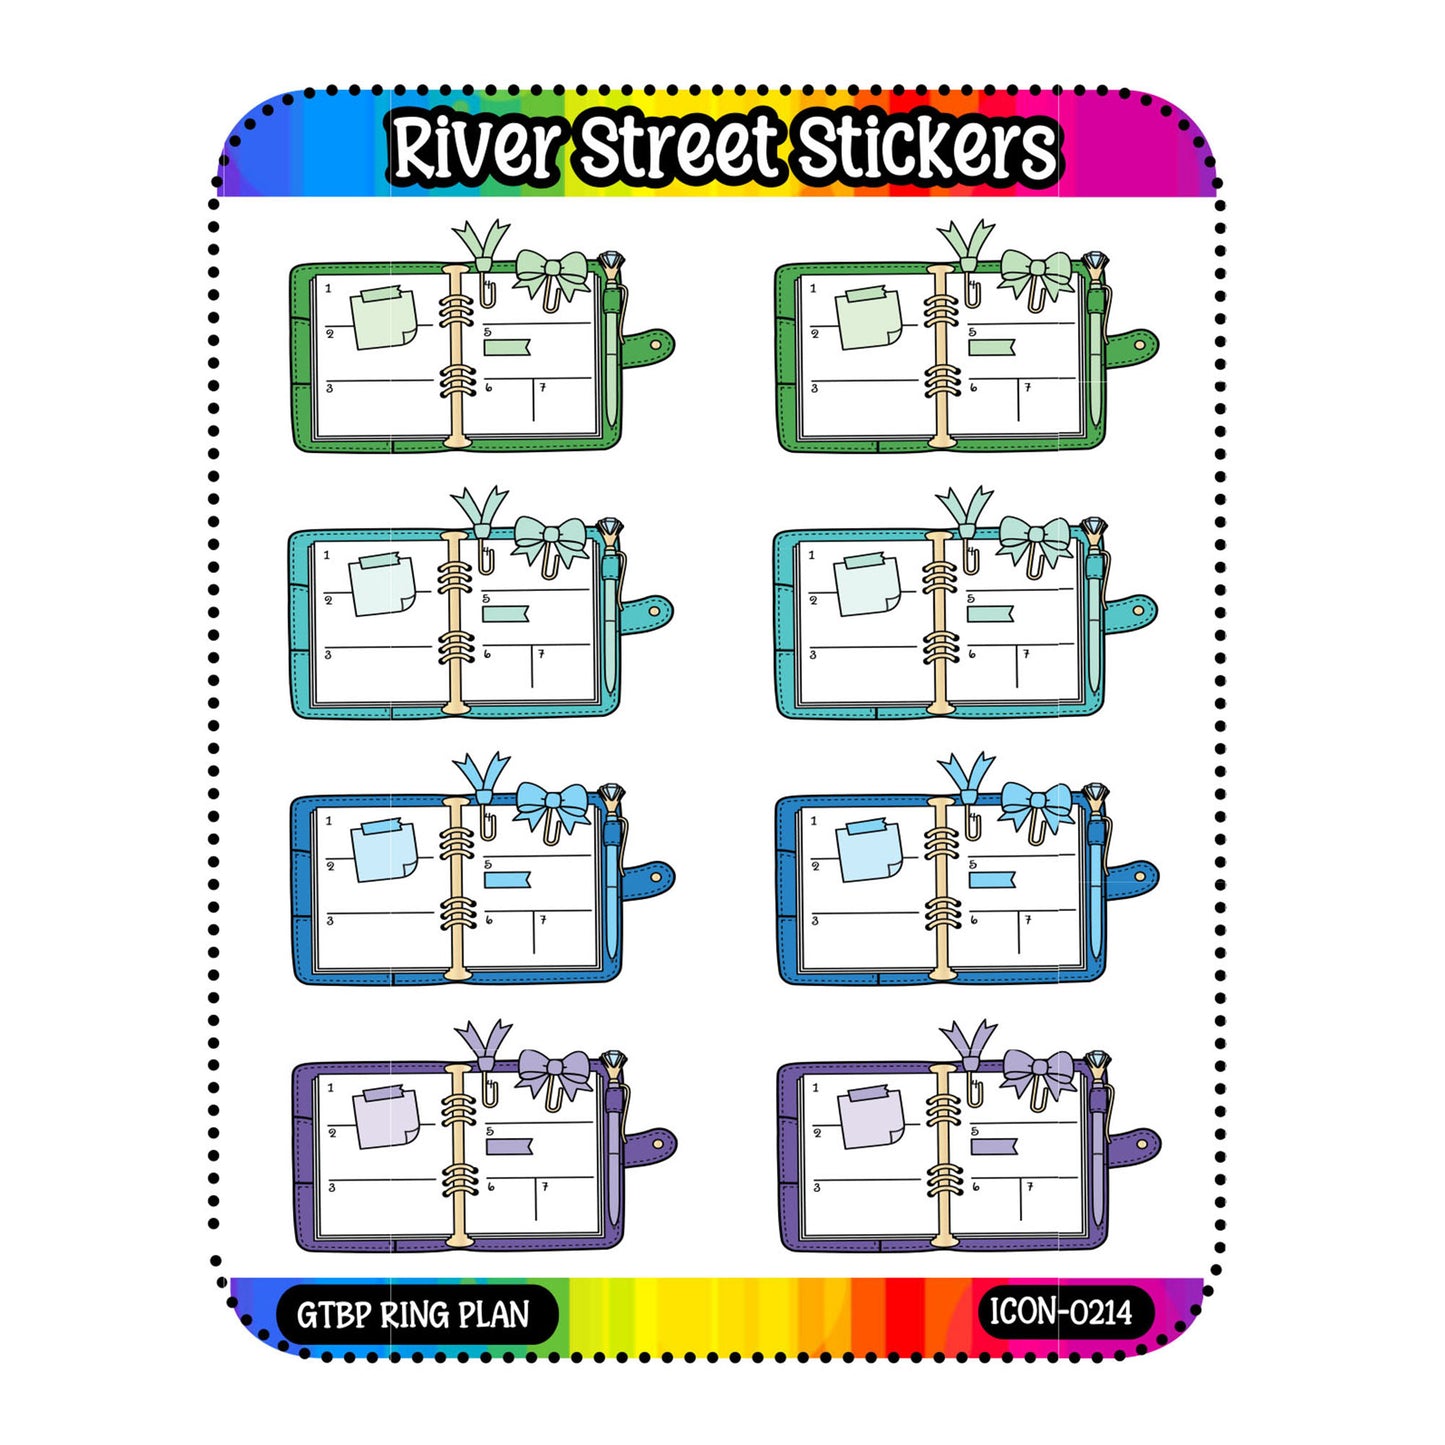 GTBP (Green, Teal, Blue, Purple) Ring Planner Icons